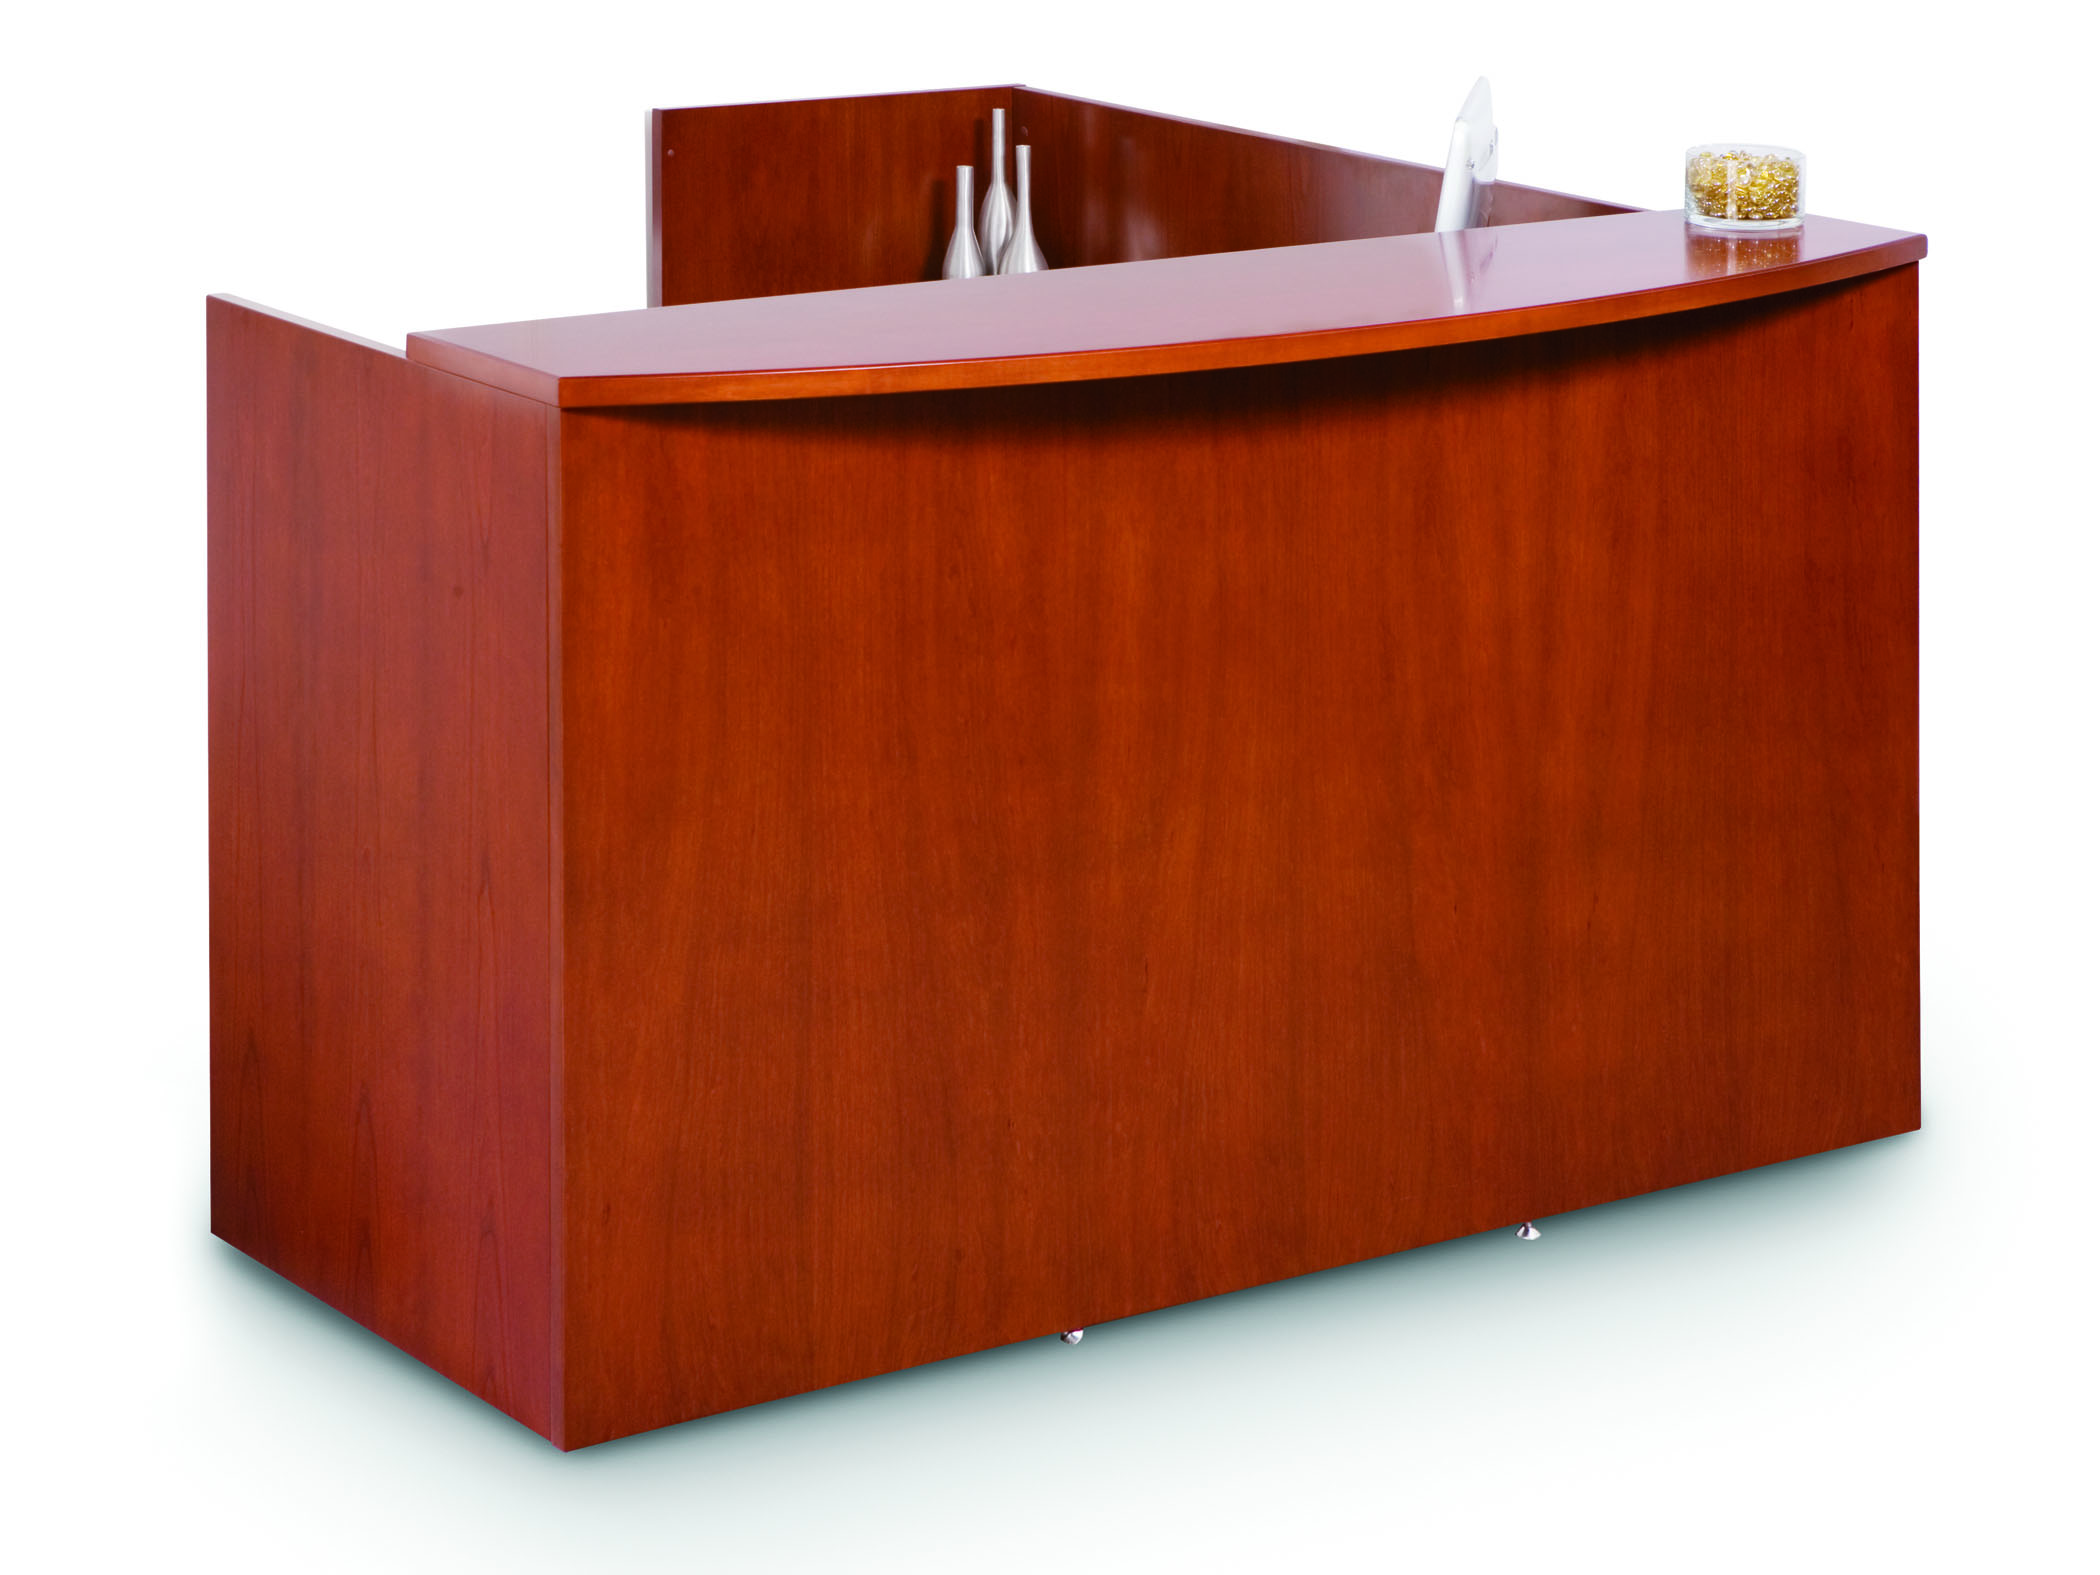 Reception Area Furniture from Compel - Insignia reception desk - front view